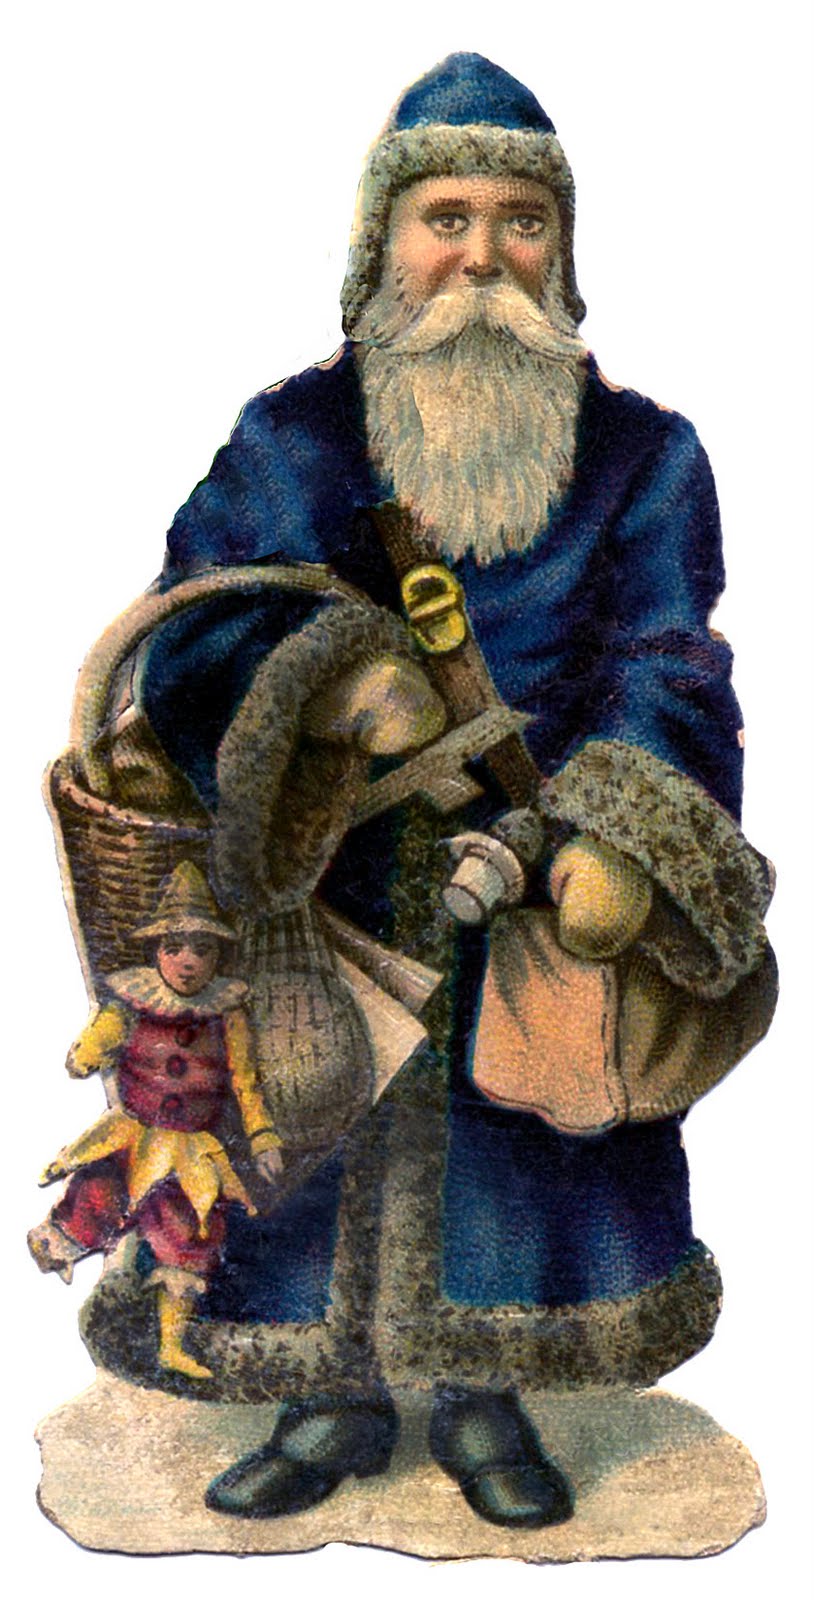 Vintage Christmas Graphic - Old World Santa in Blue Coat - The Graphics